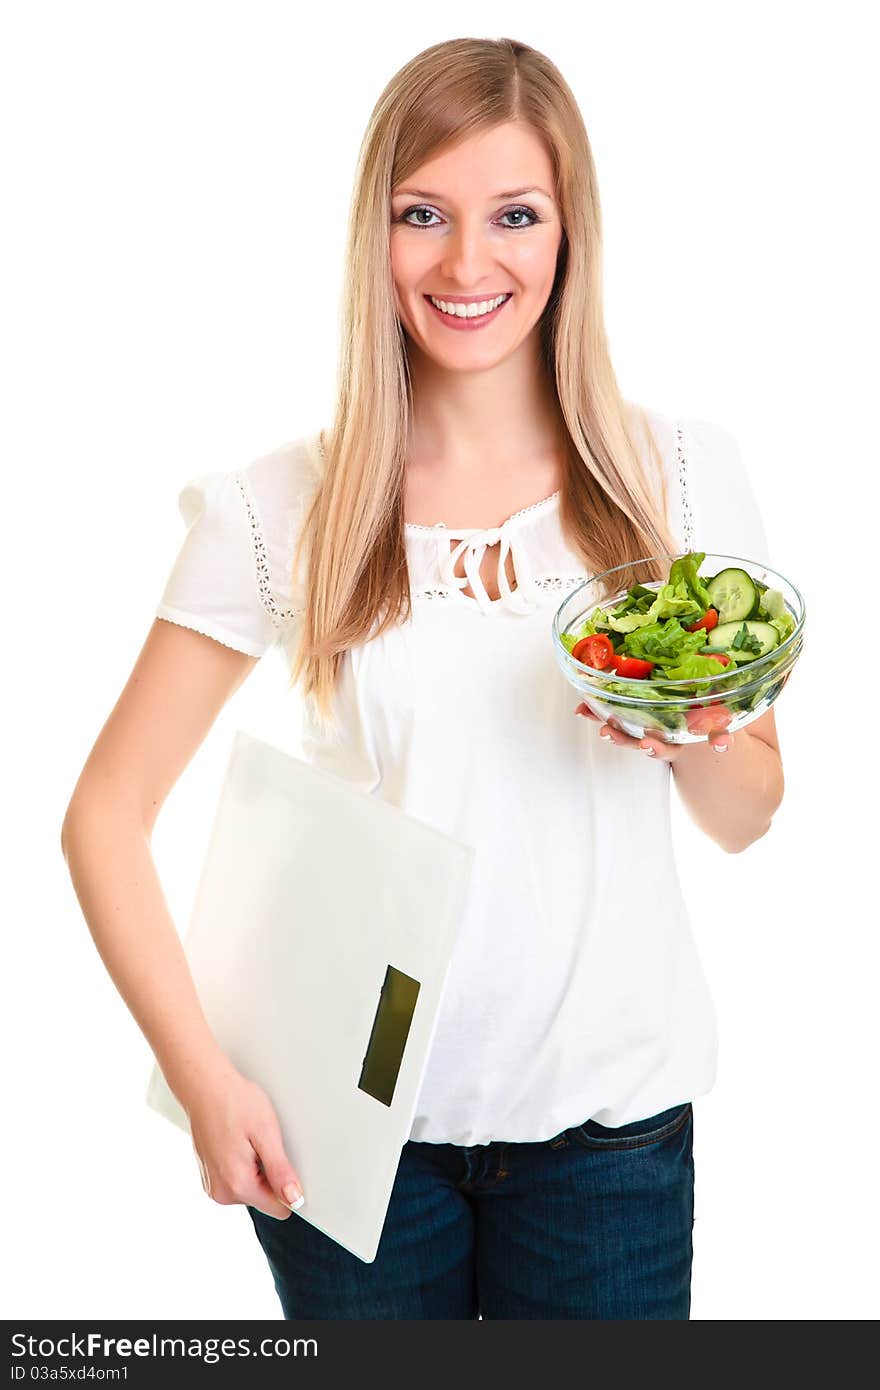 Woman with salad and scales isolated on white